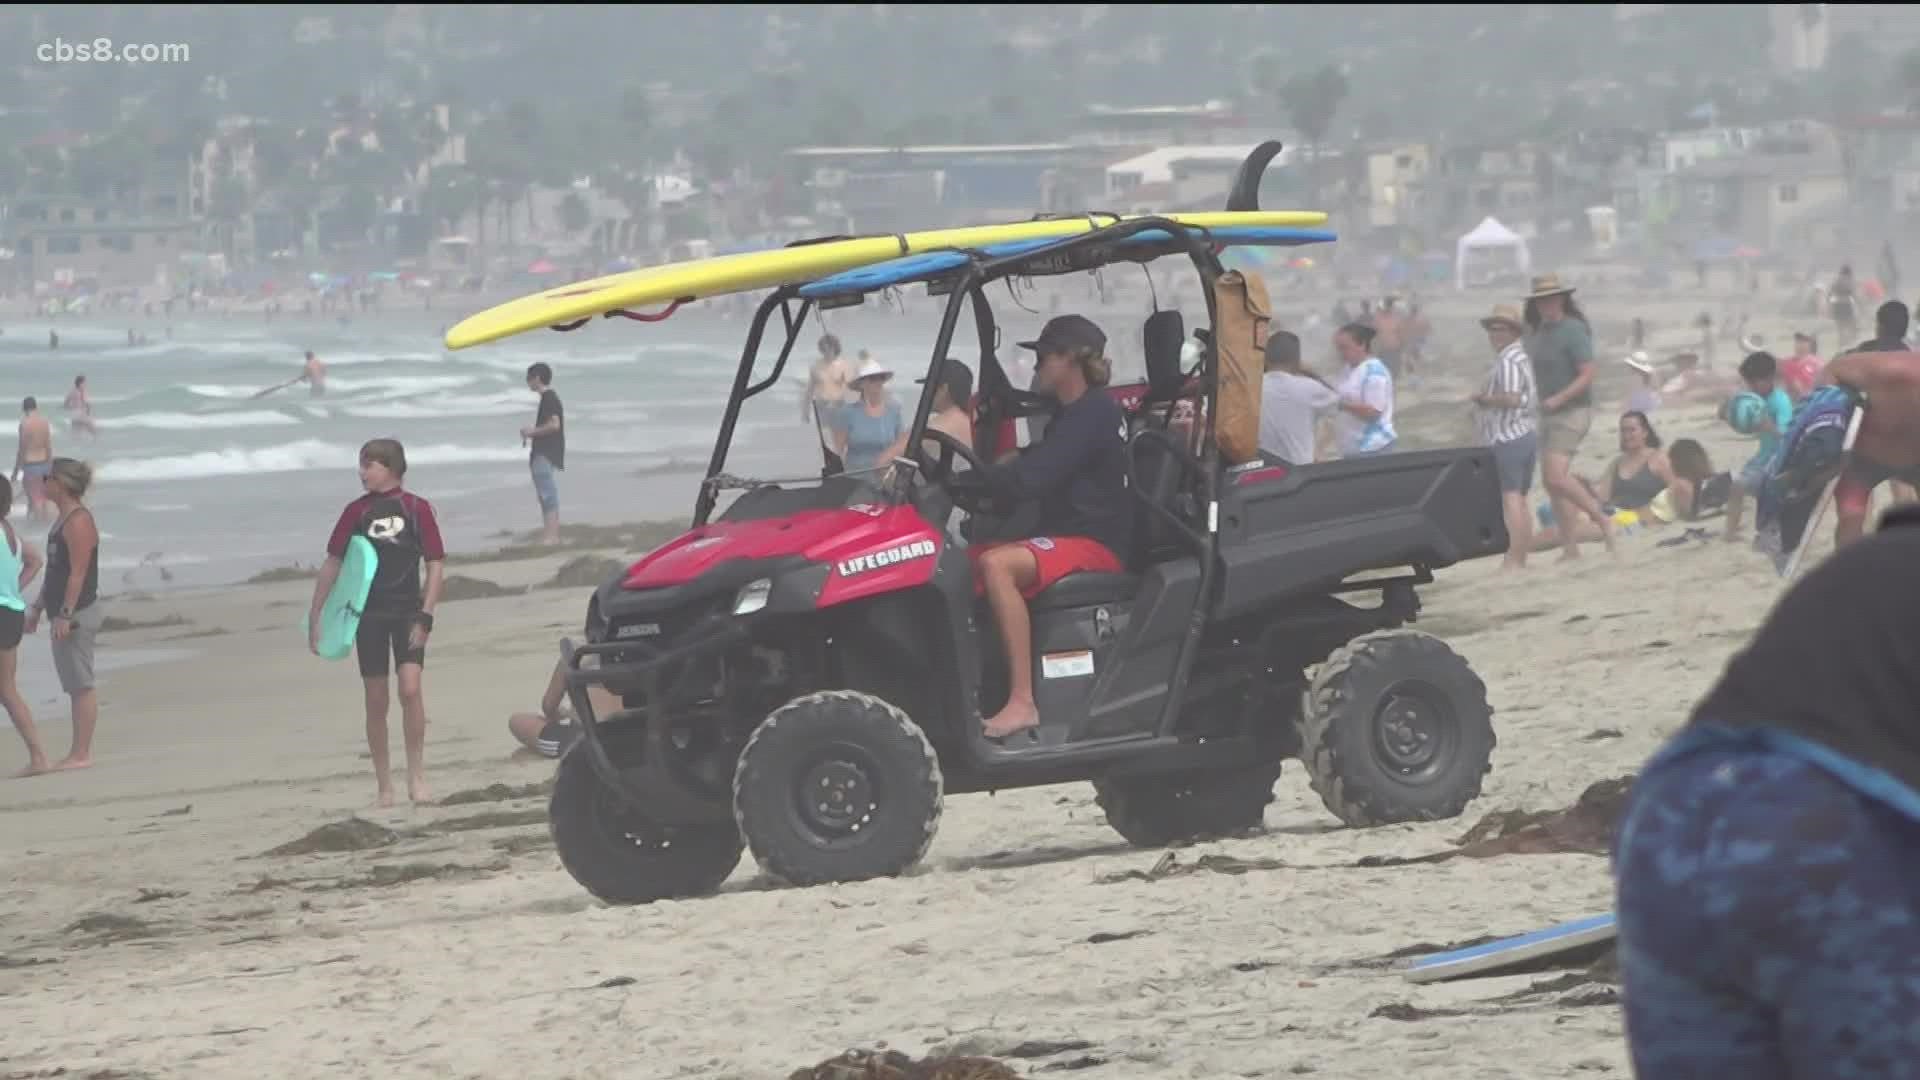 Crowded beaches keep San Diego lifeguards busy on Labor Day.